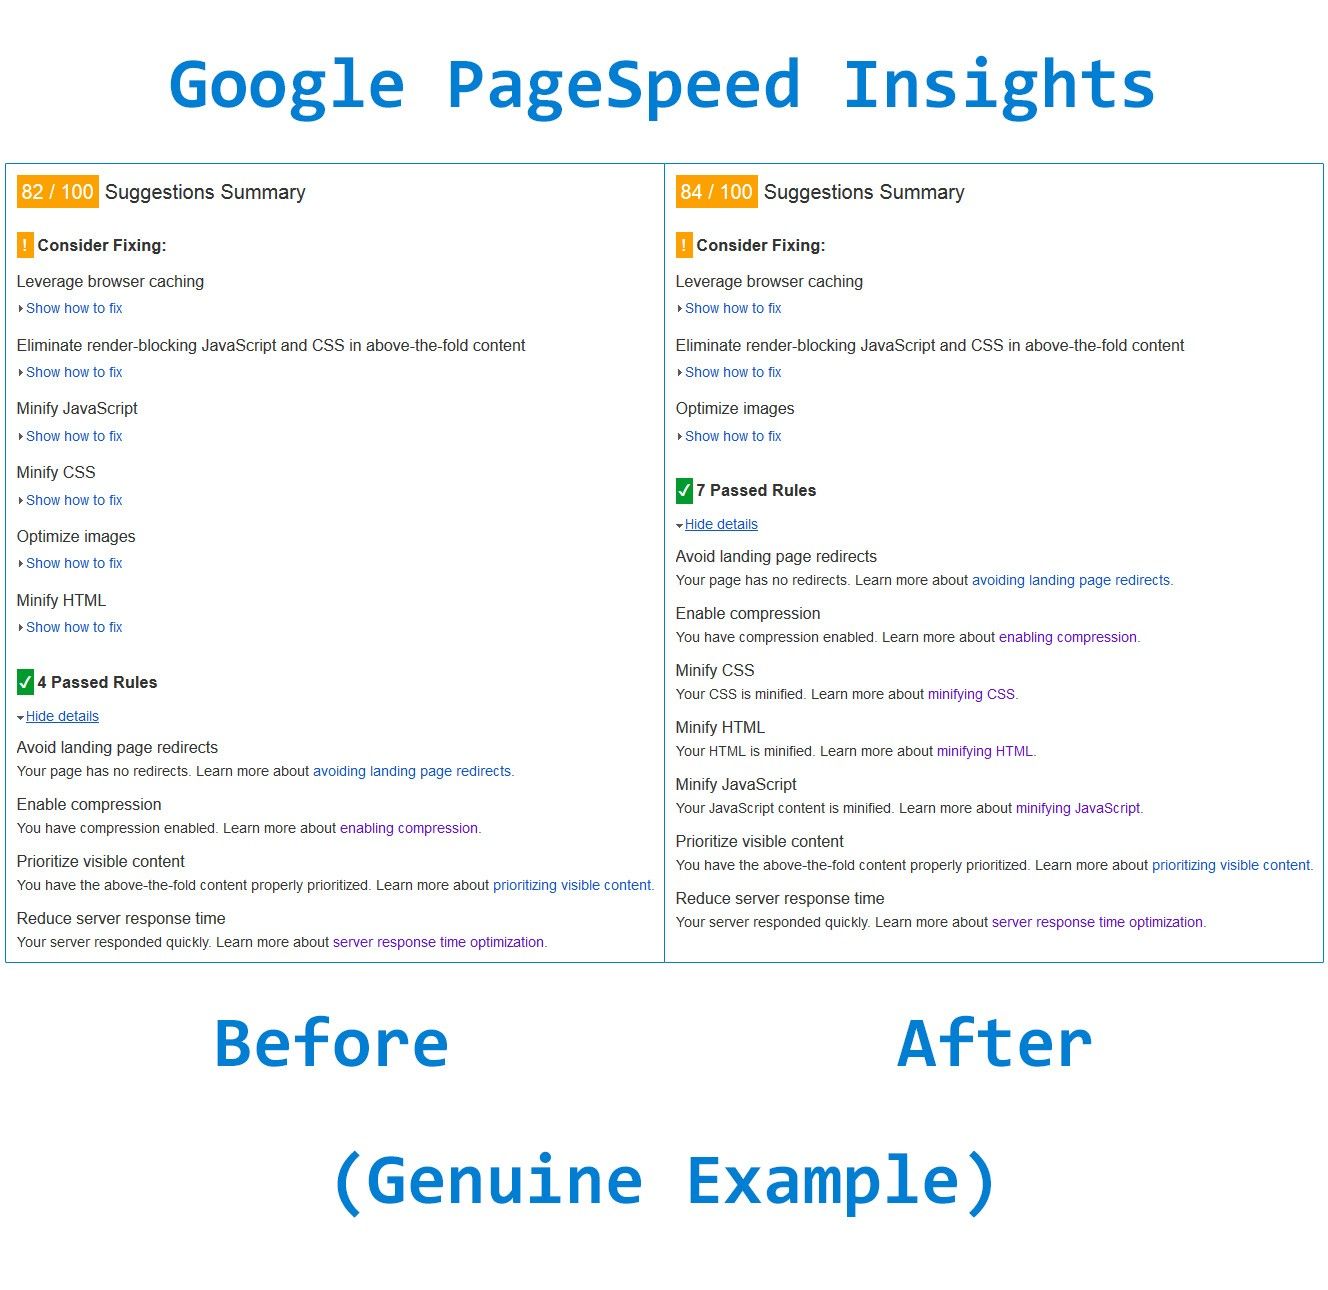 Screenshot showing before-after for google pagespeed insights